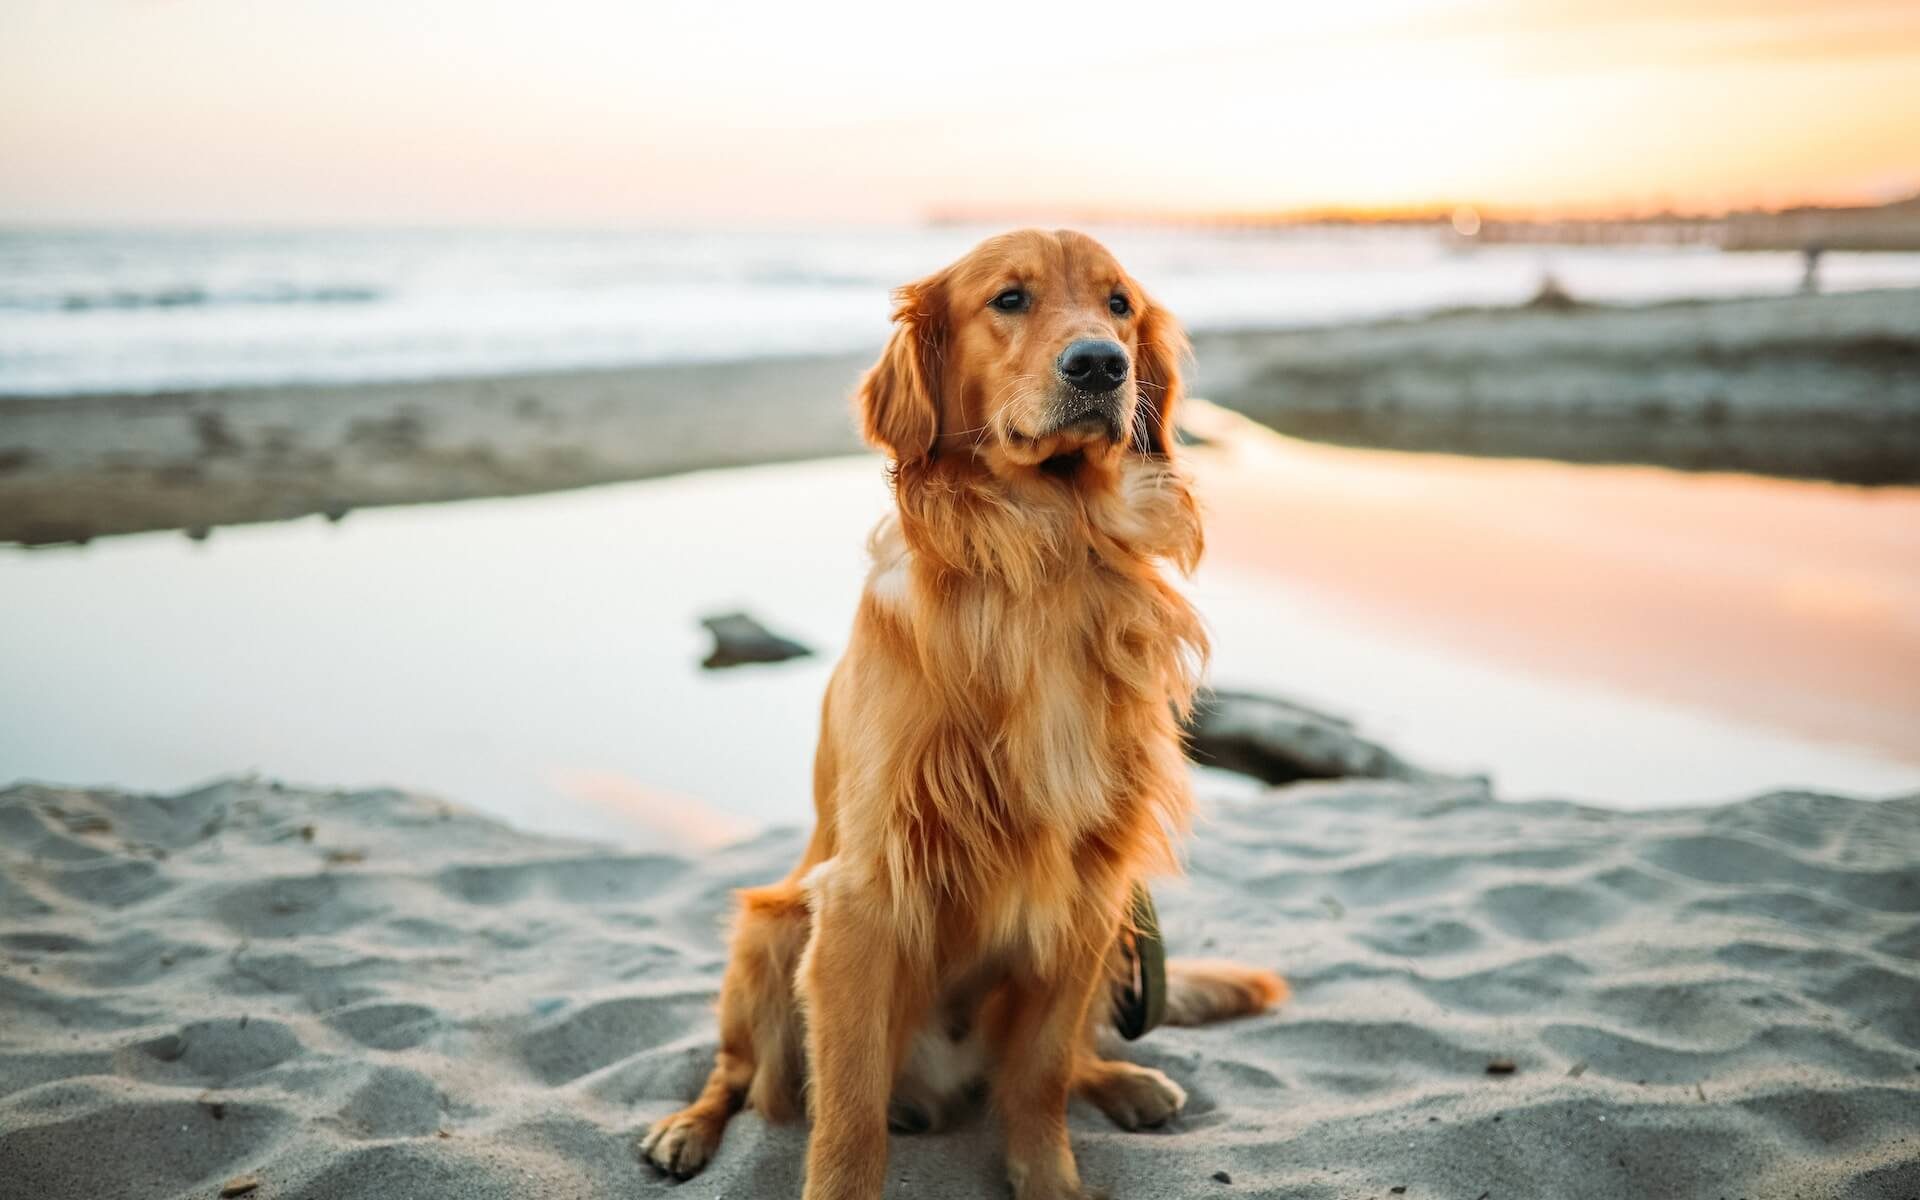 An adorable Golden Retriever dog with a friendly expression.